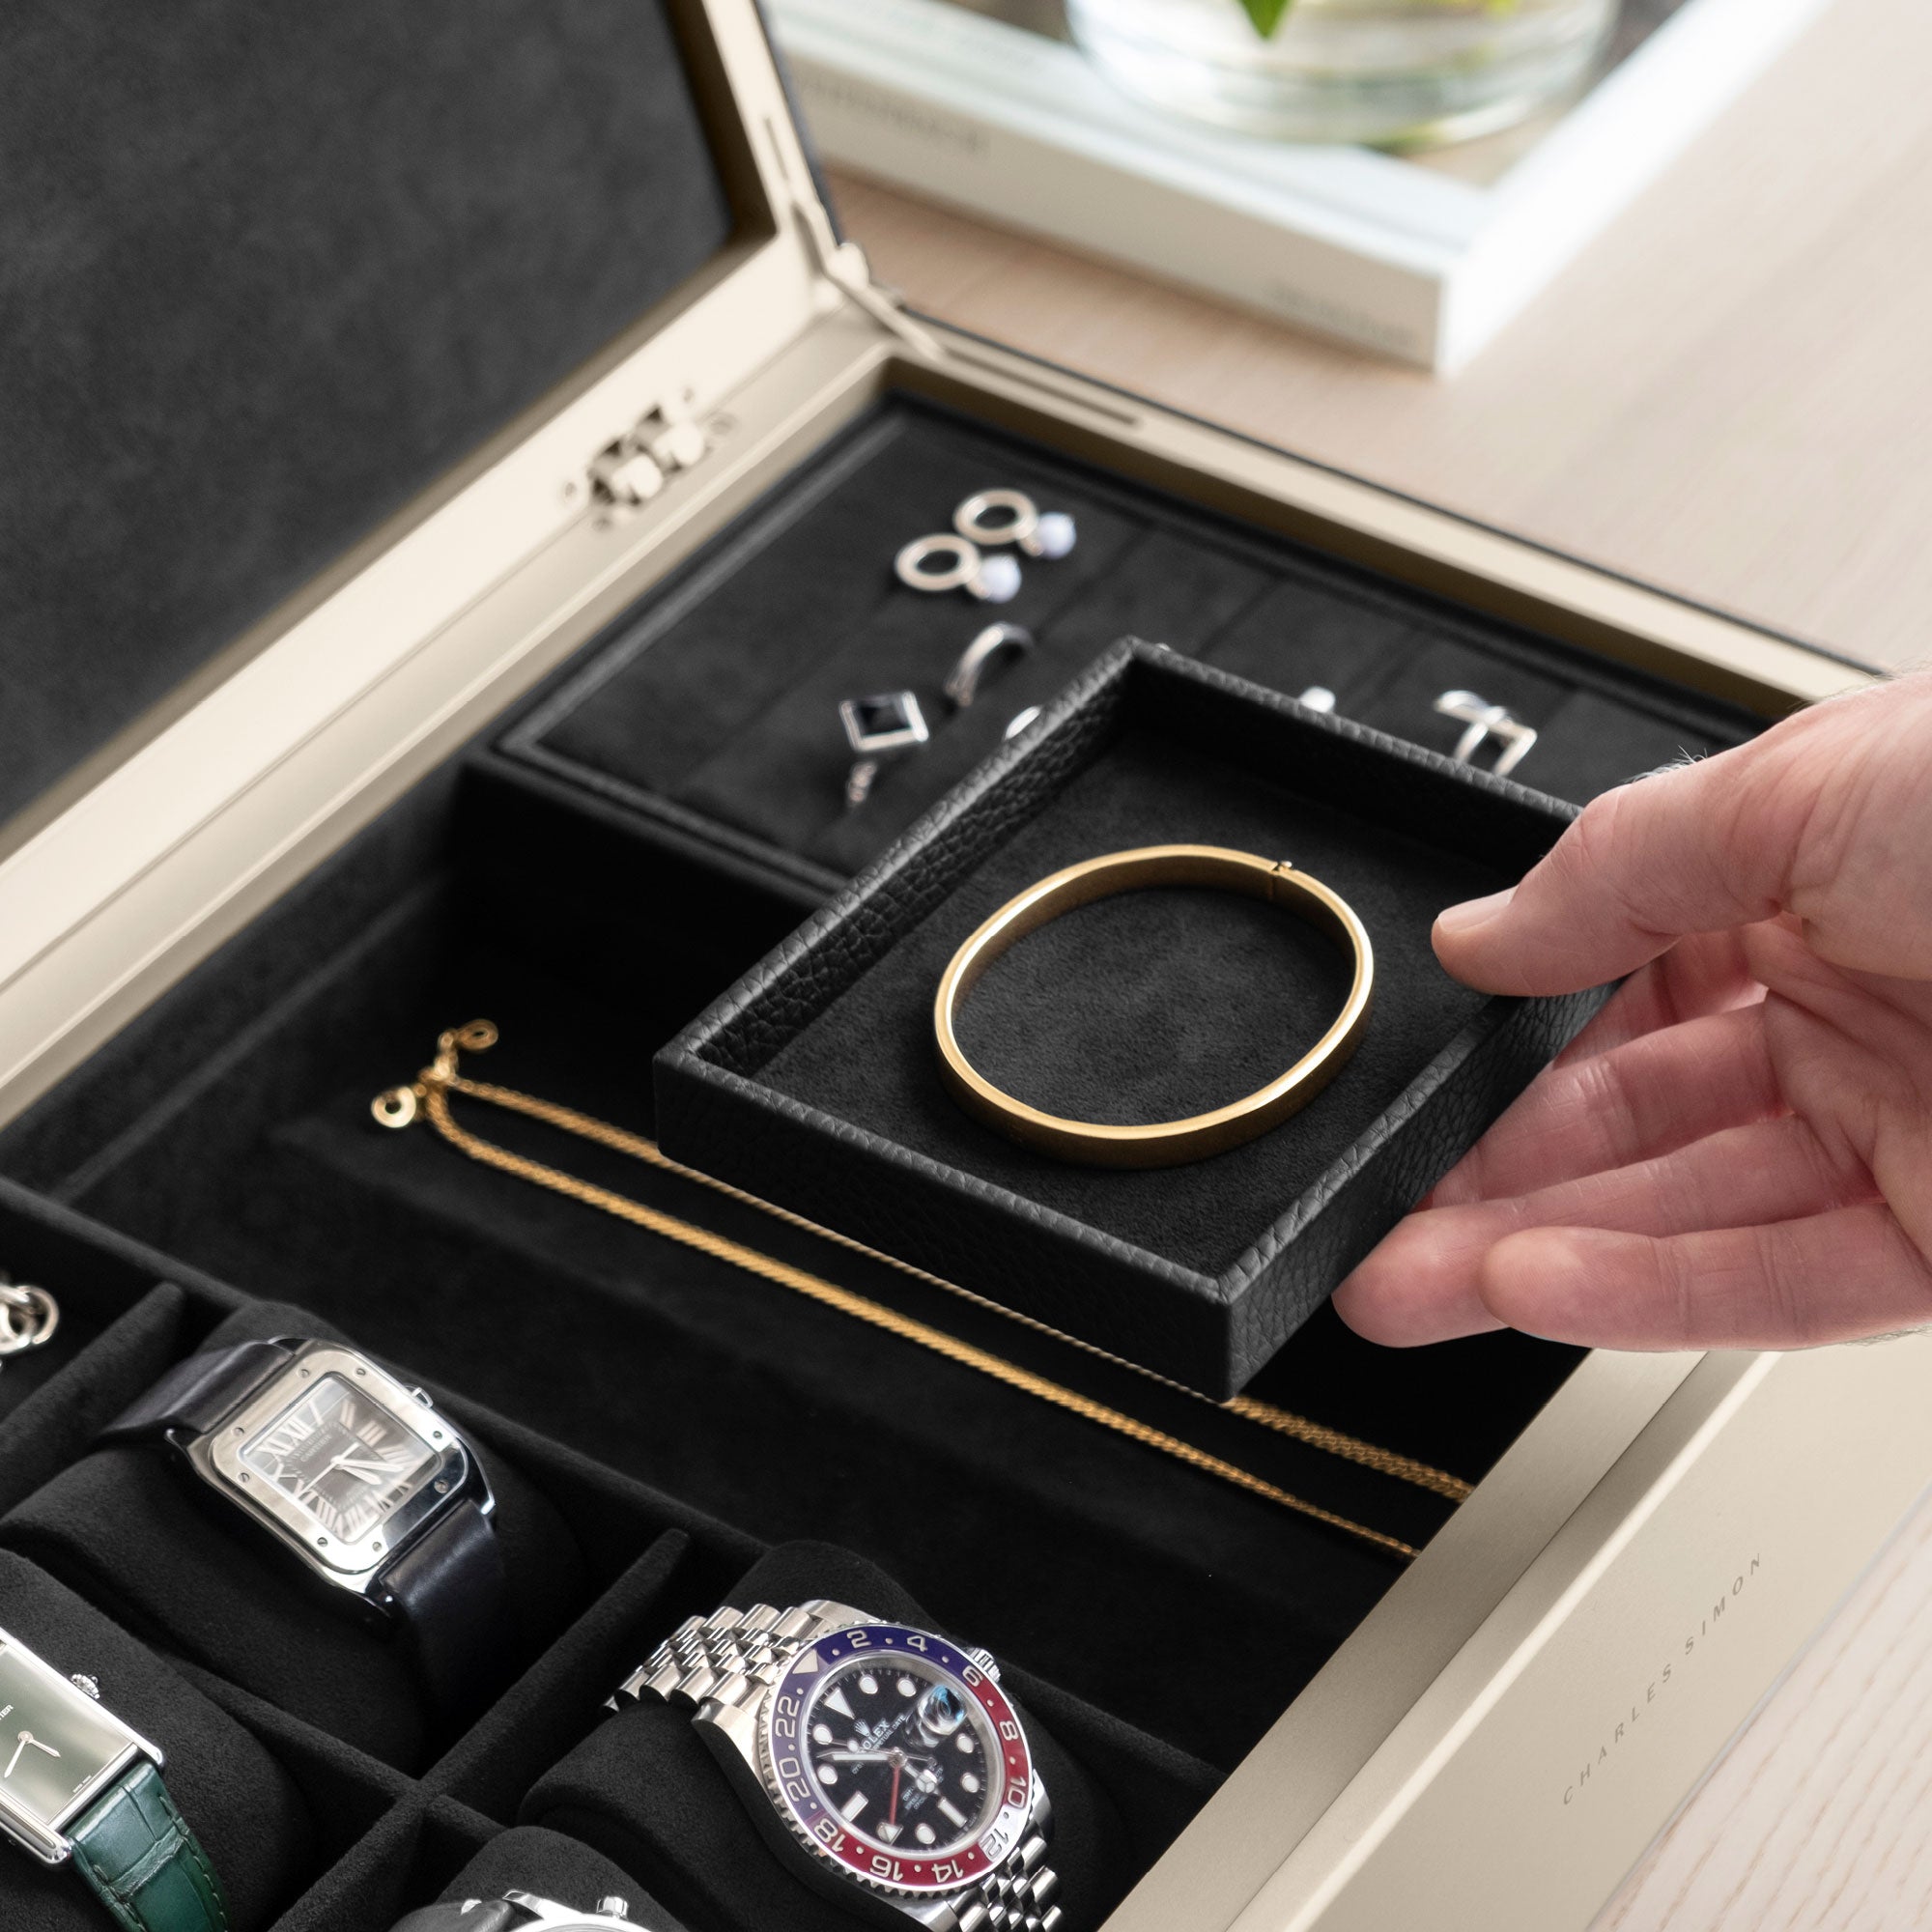 TAYLOR 4 WATCH AND JEWELRY BOX - BLACK / CHAMPAGNE